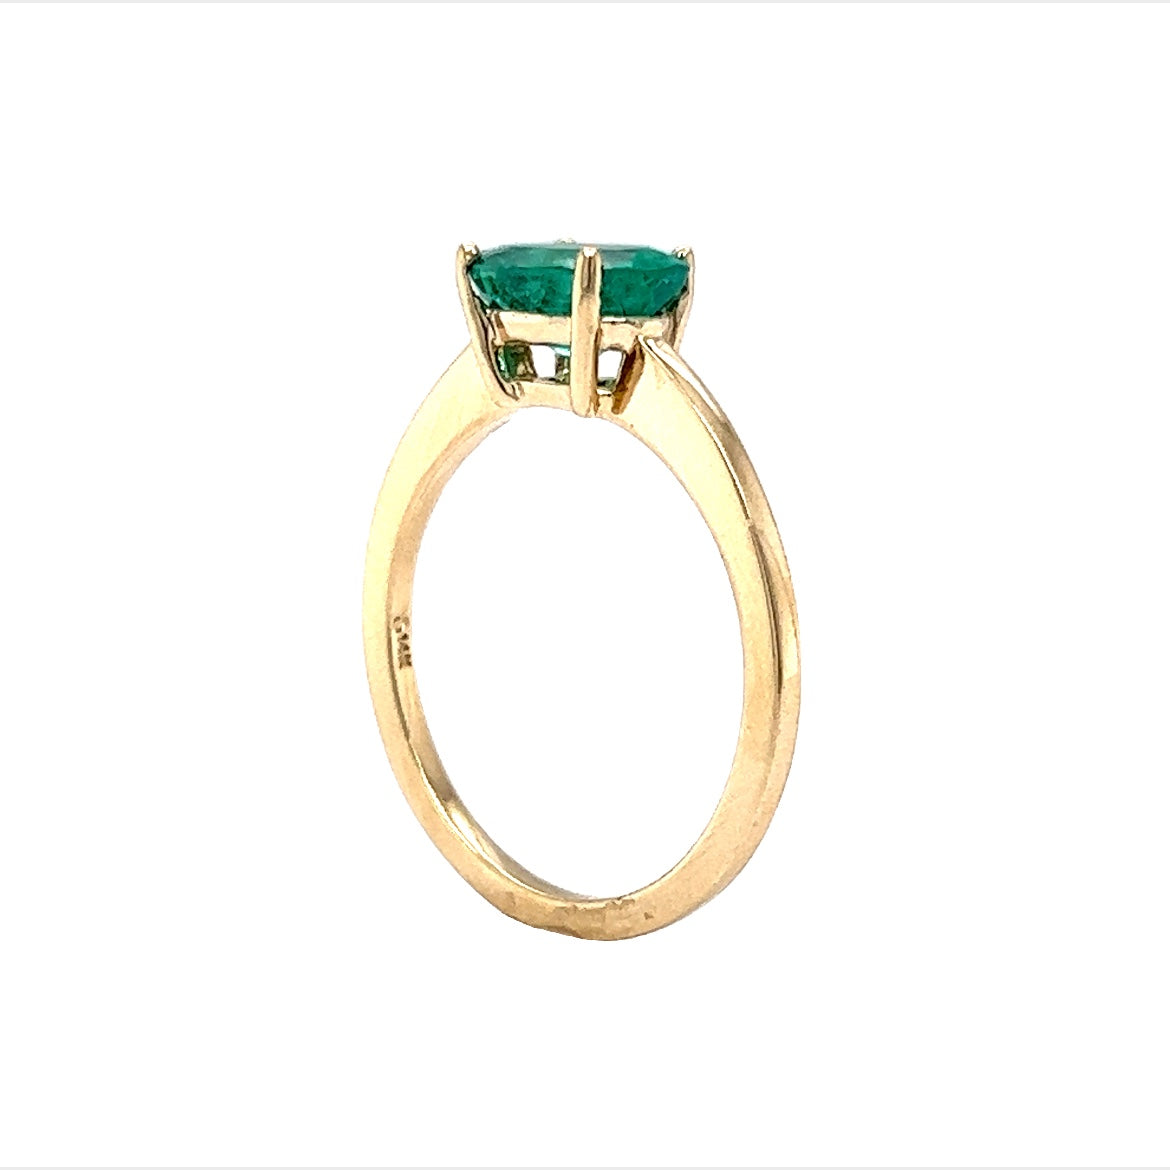 Solitaire Oval Cut Emerald Ring in 14k Yellow Gold